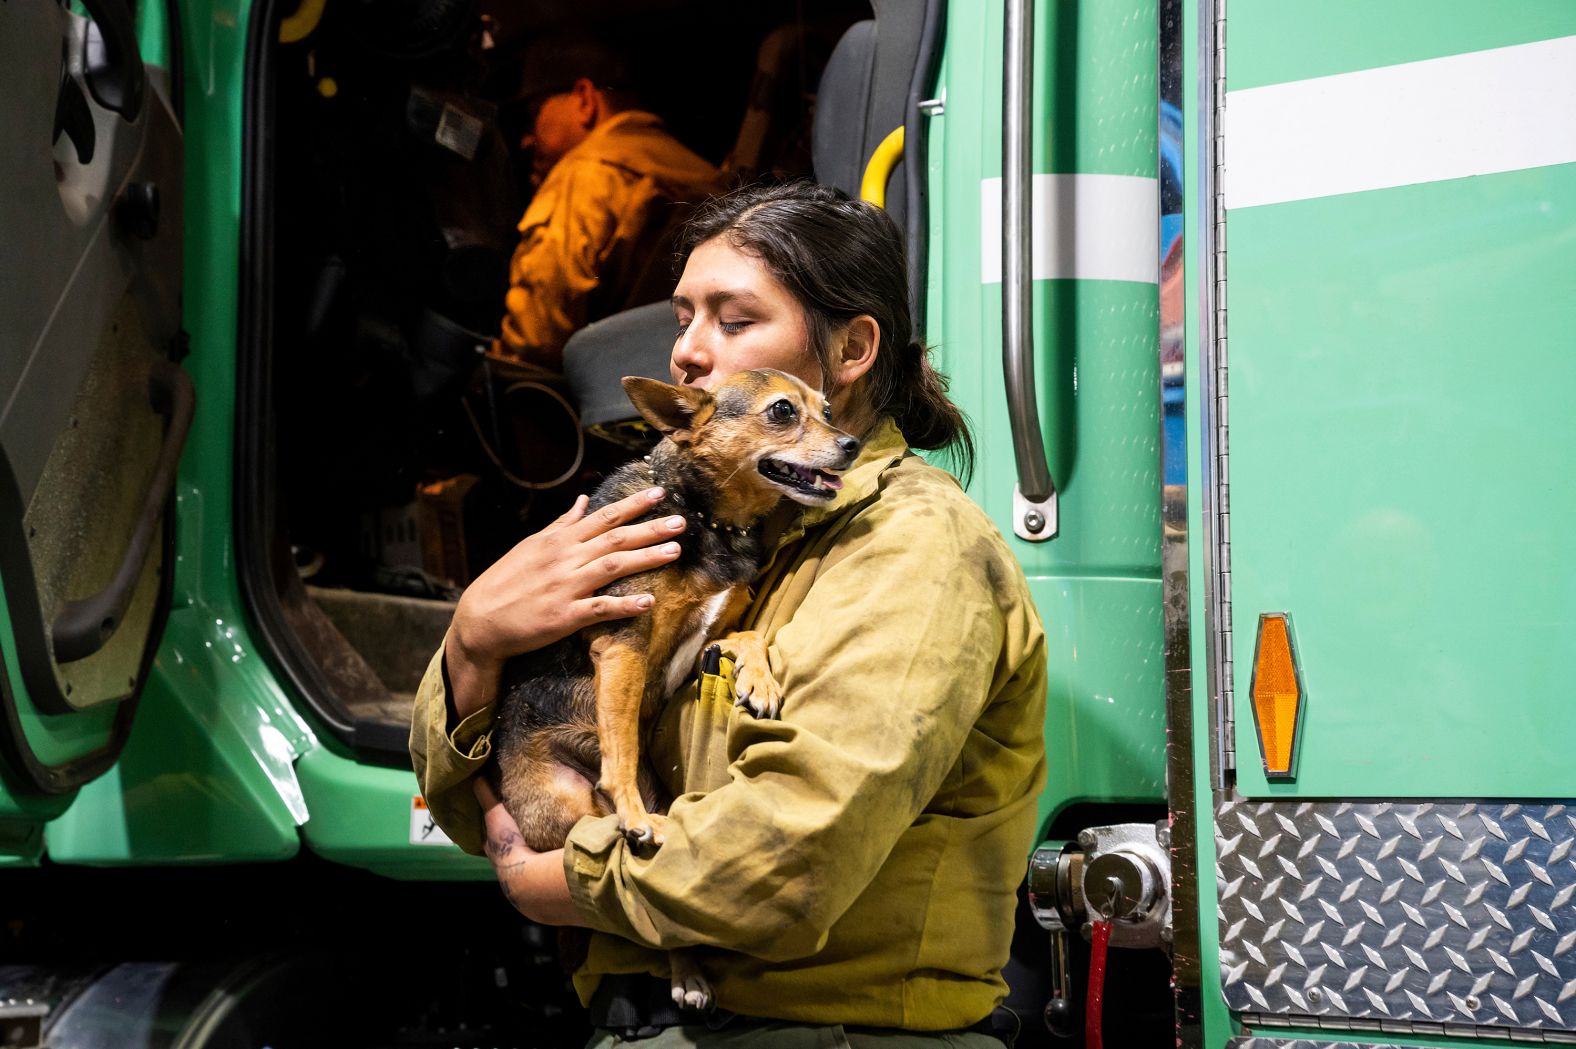 Firefighter Joanna Jimenez holds a dog she found wandering in an evacuation zone on Saturday.